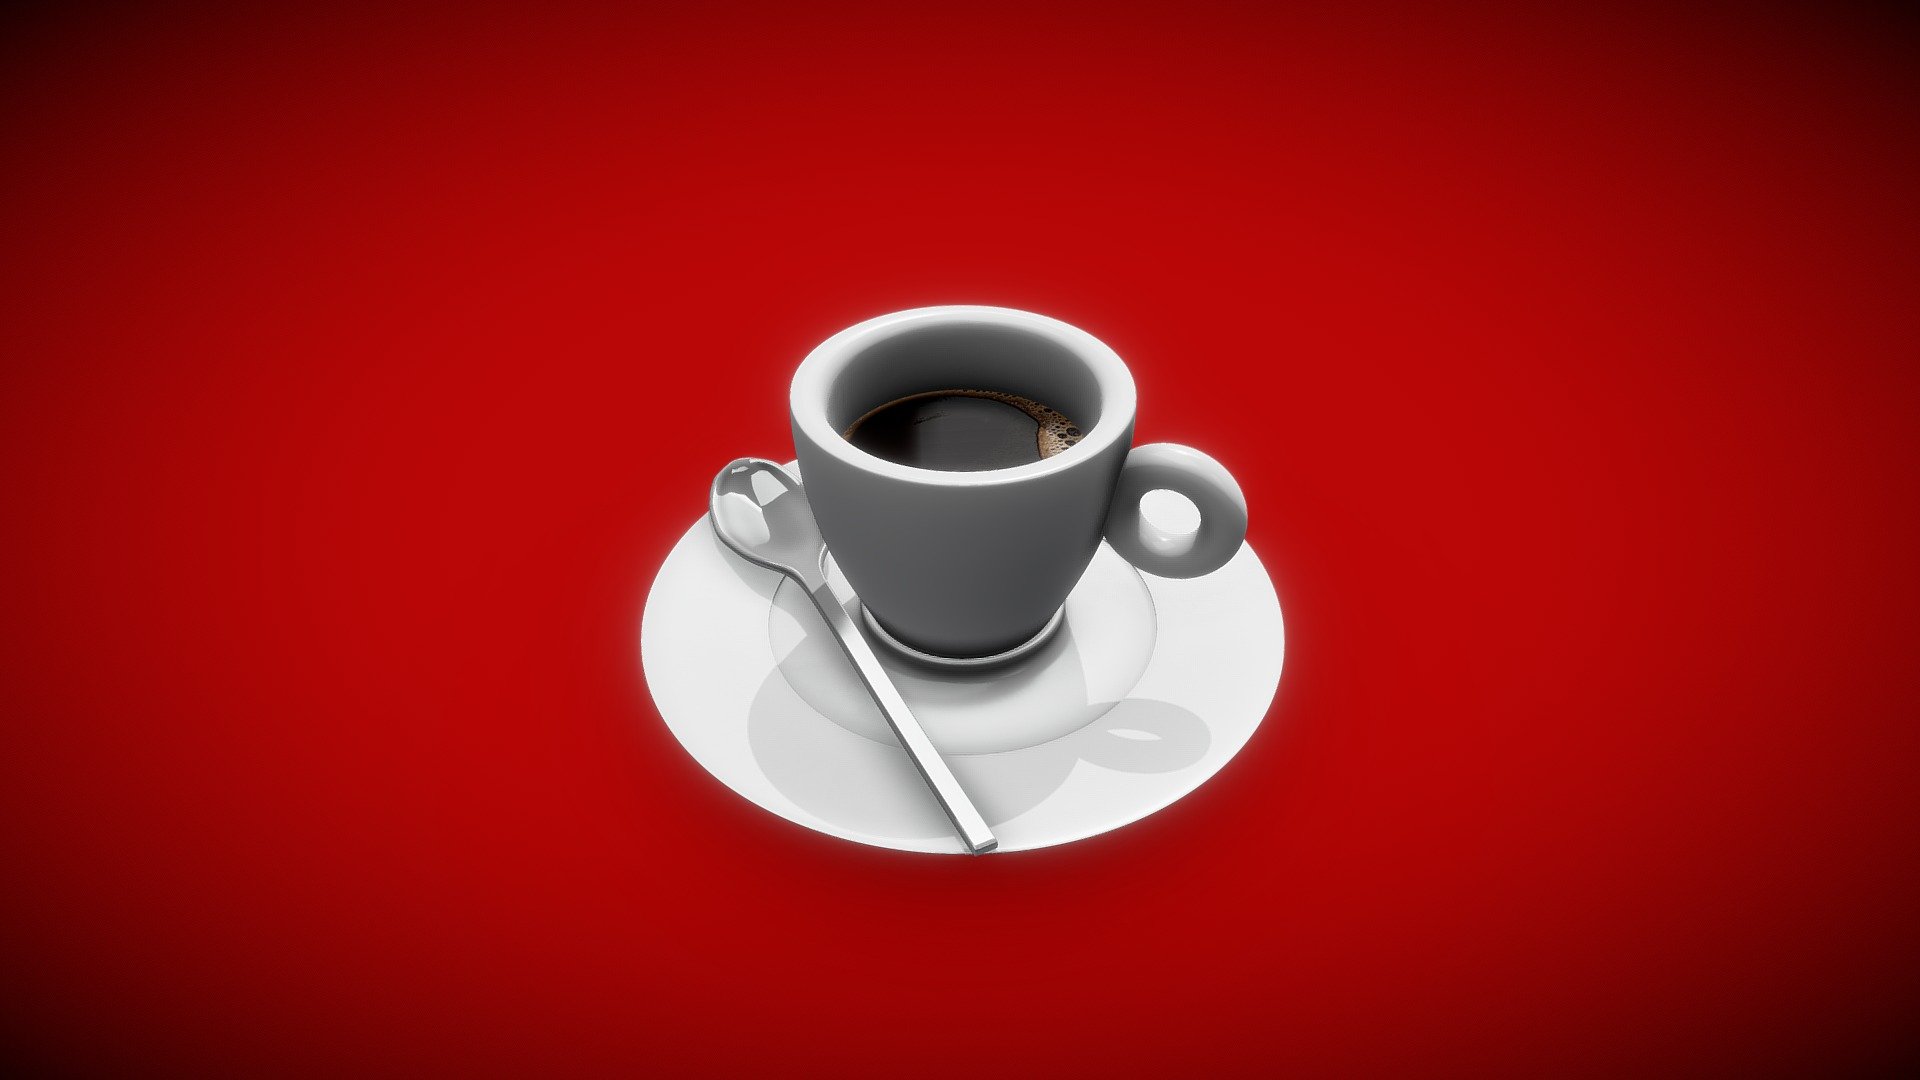 The real taste of an Italian coffee ☕
This model includes the little coffee cup, the little plate and the spoon.

Created with Blender.

IMPORTANT

If you're going to use this model for your own project choose the glTF format because the .blend file it's always uncompleted in my projects, because I always finish to add more stuff and textures (especially normal, rough and spec maps) into the Sketchfab editor 3d model